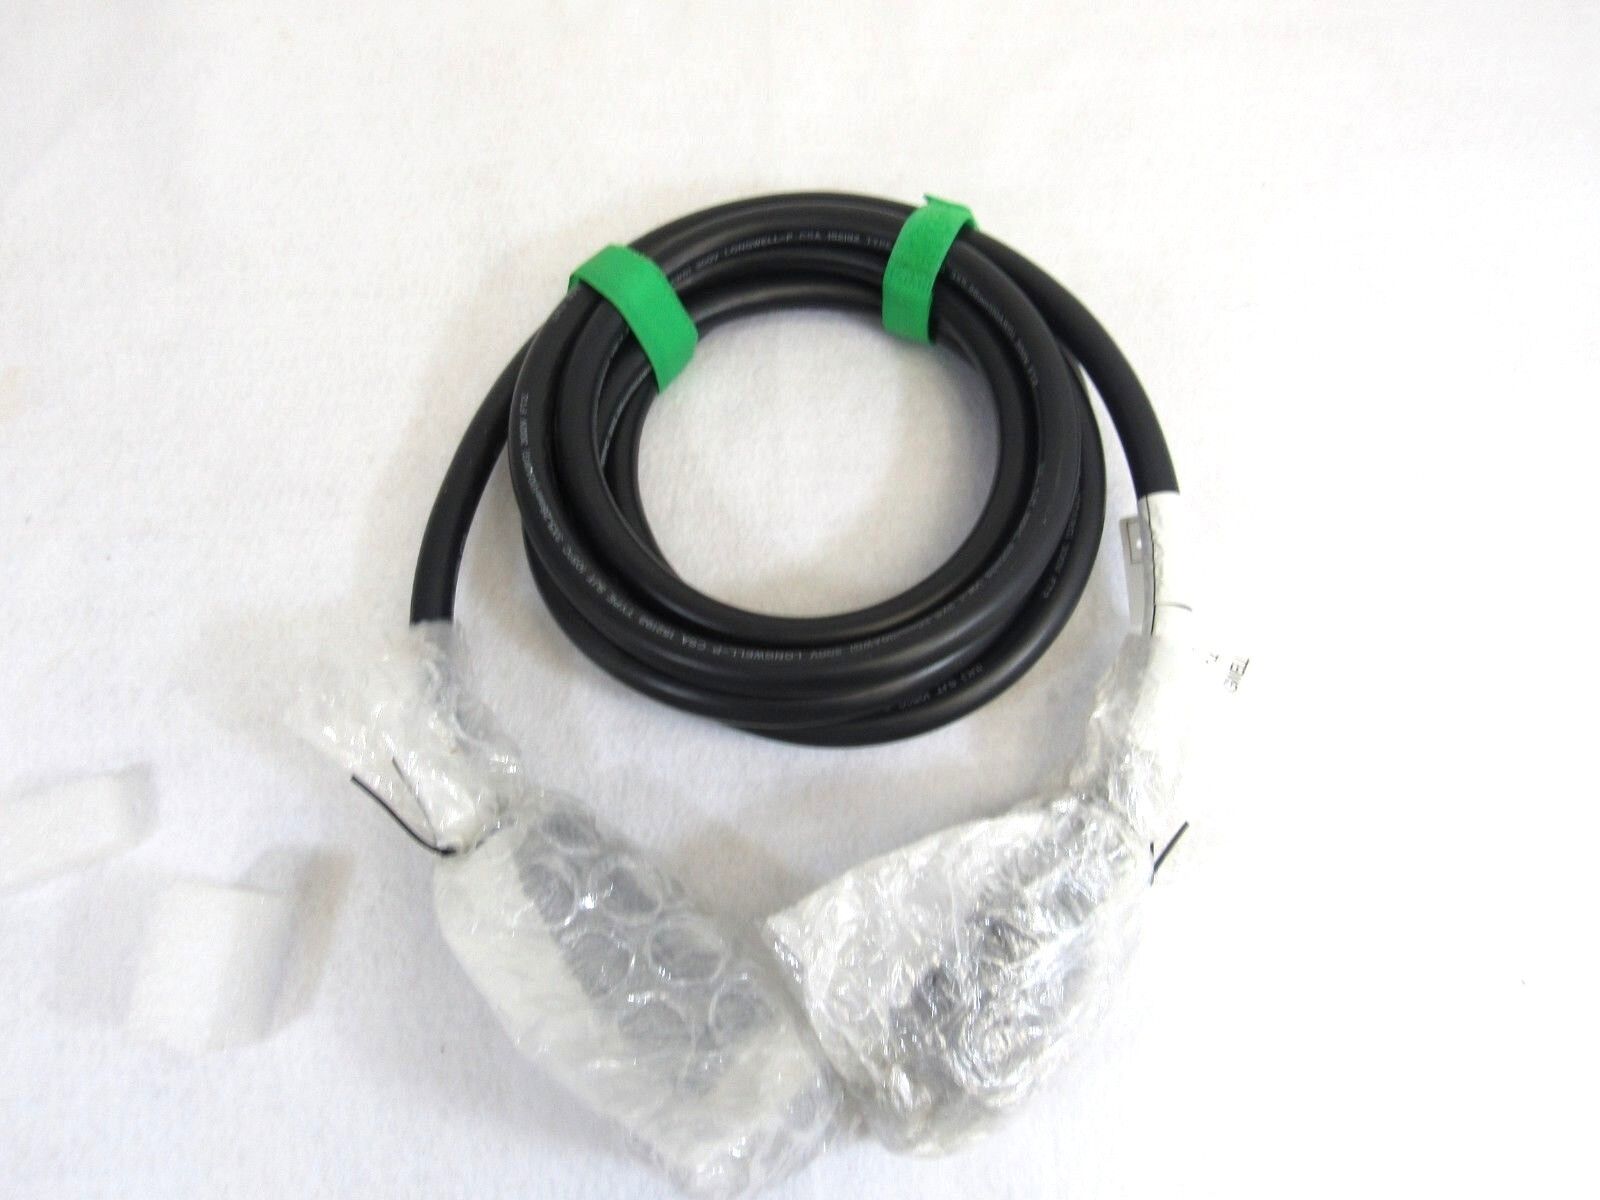 IBM Longwell 39M5416 PDU L6-30 14FT Power Cable 74-2